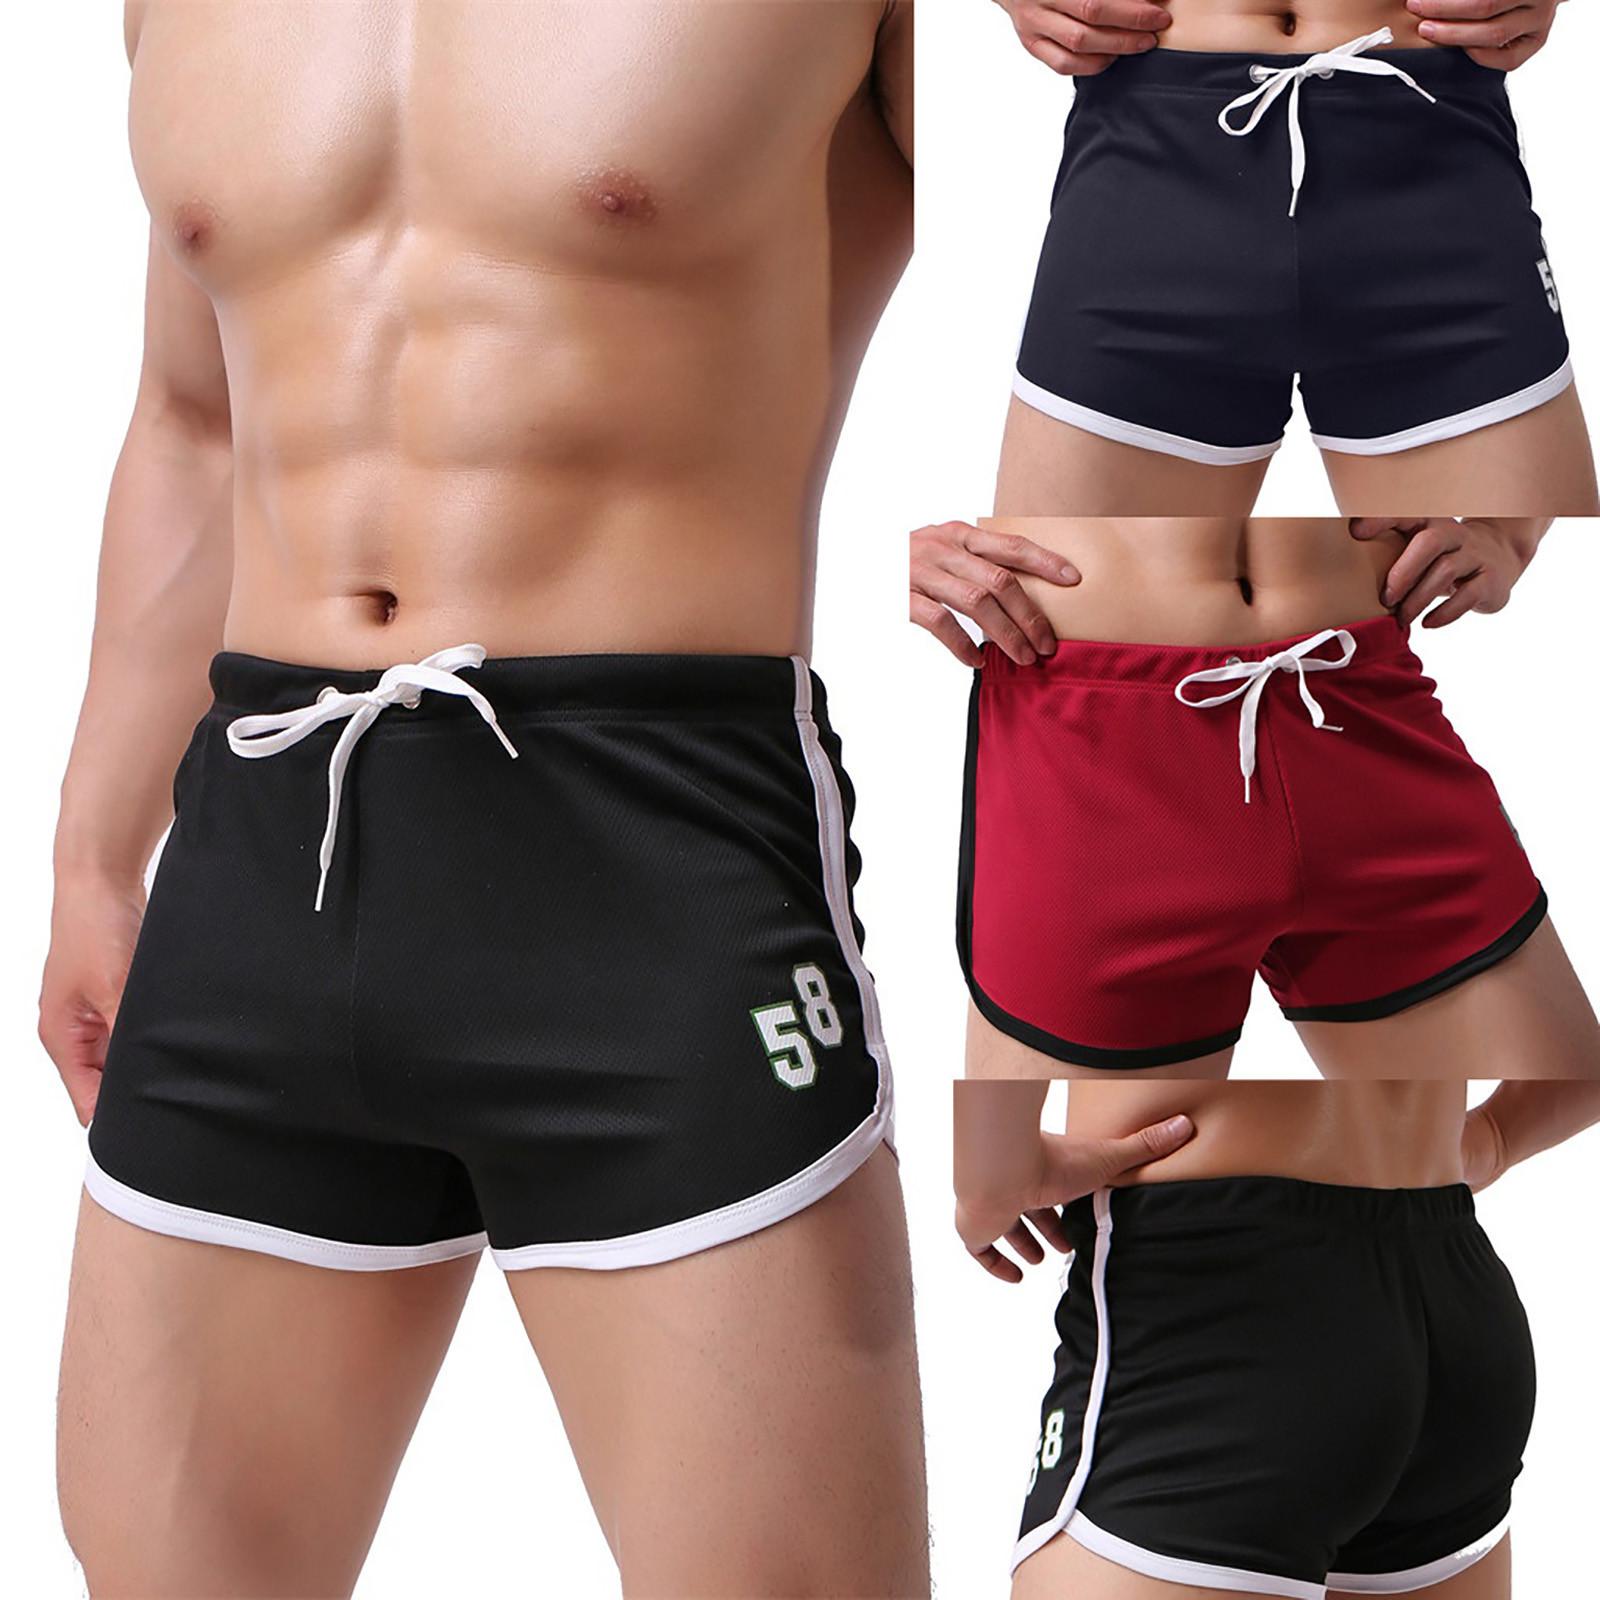 Newstar Summer Casual Thin Fast-drying Air-breathable Fit Sports Shorts Broek voor heren